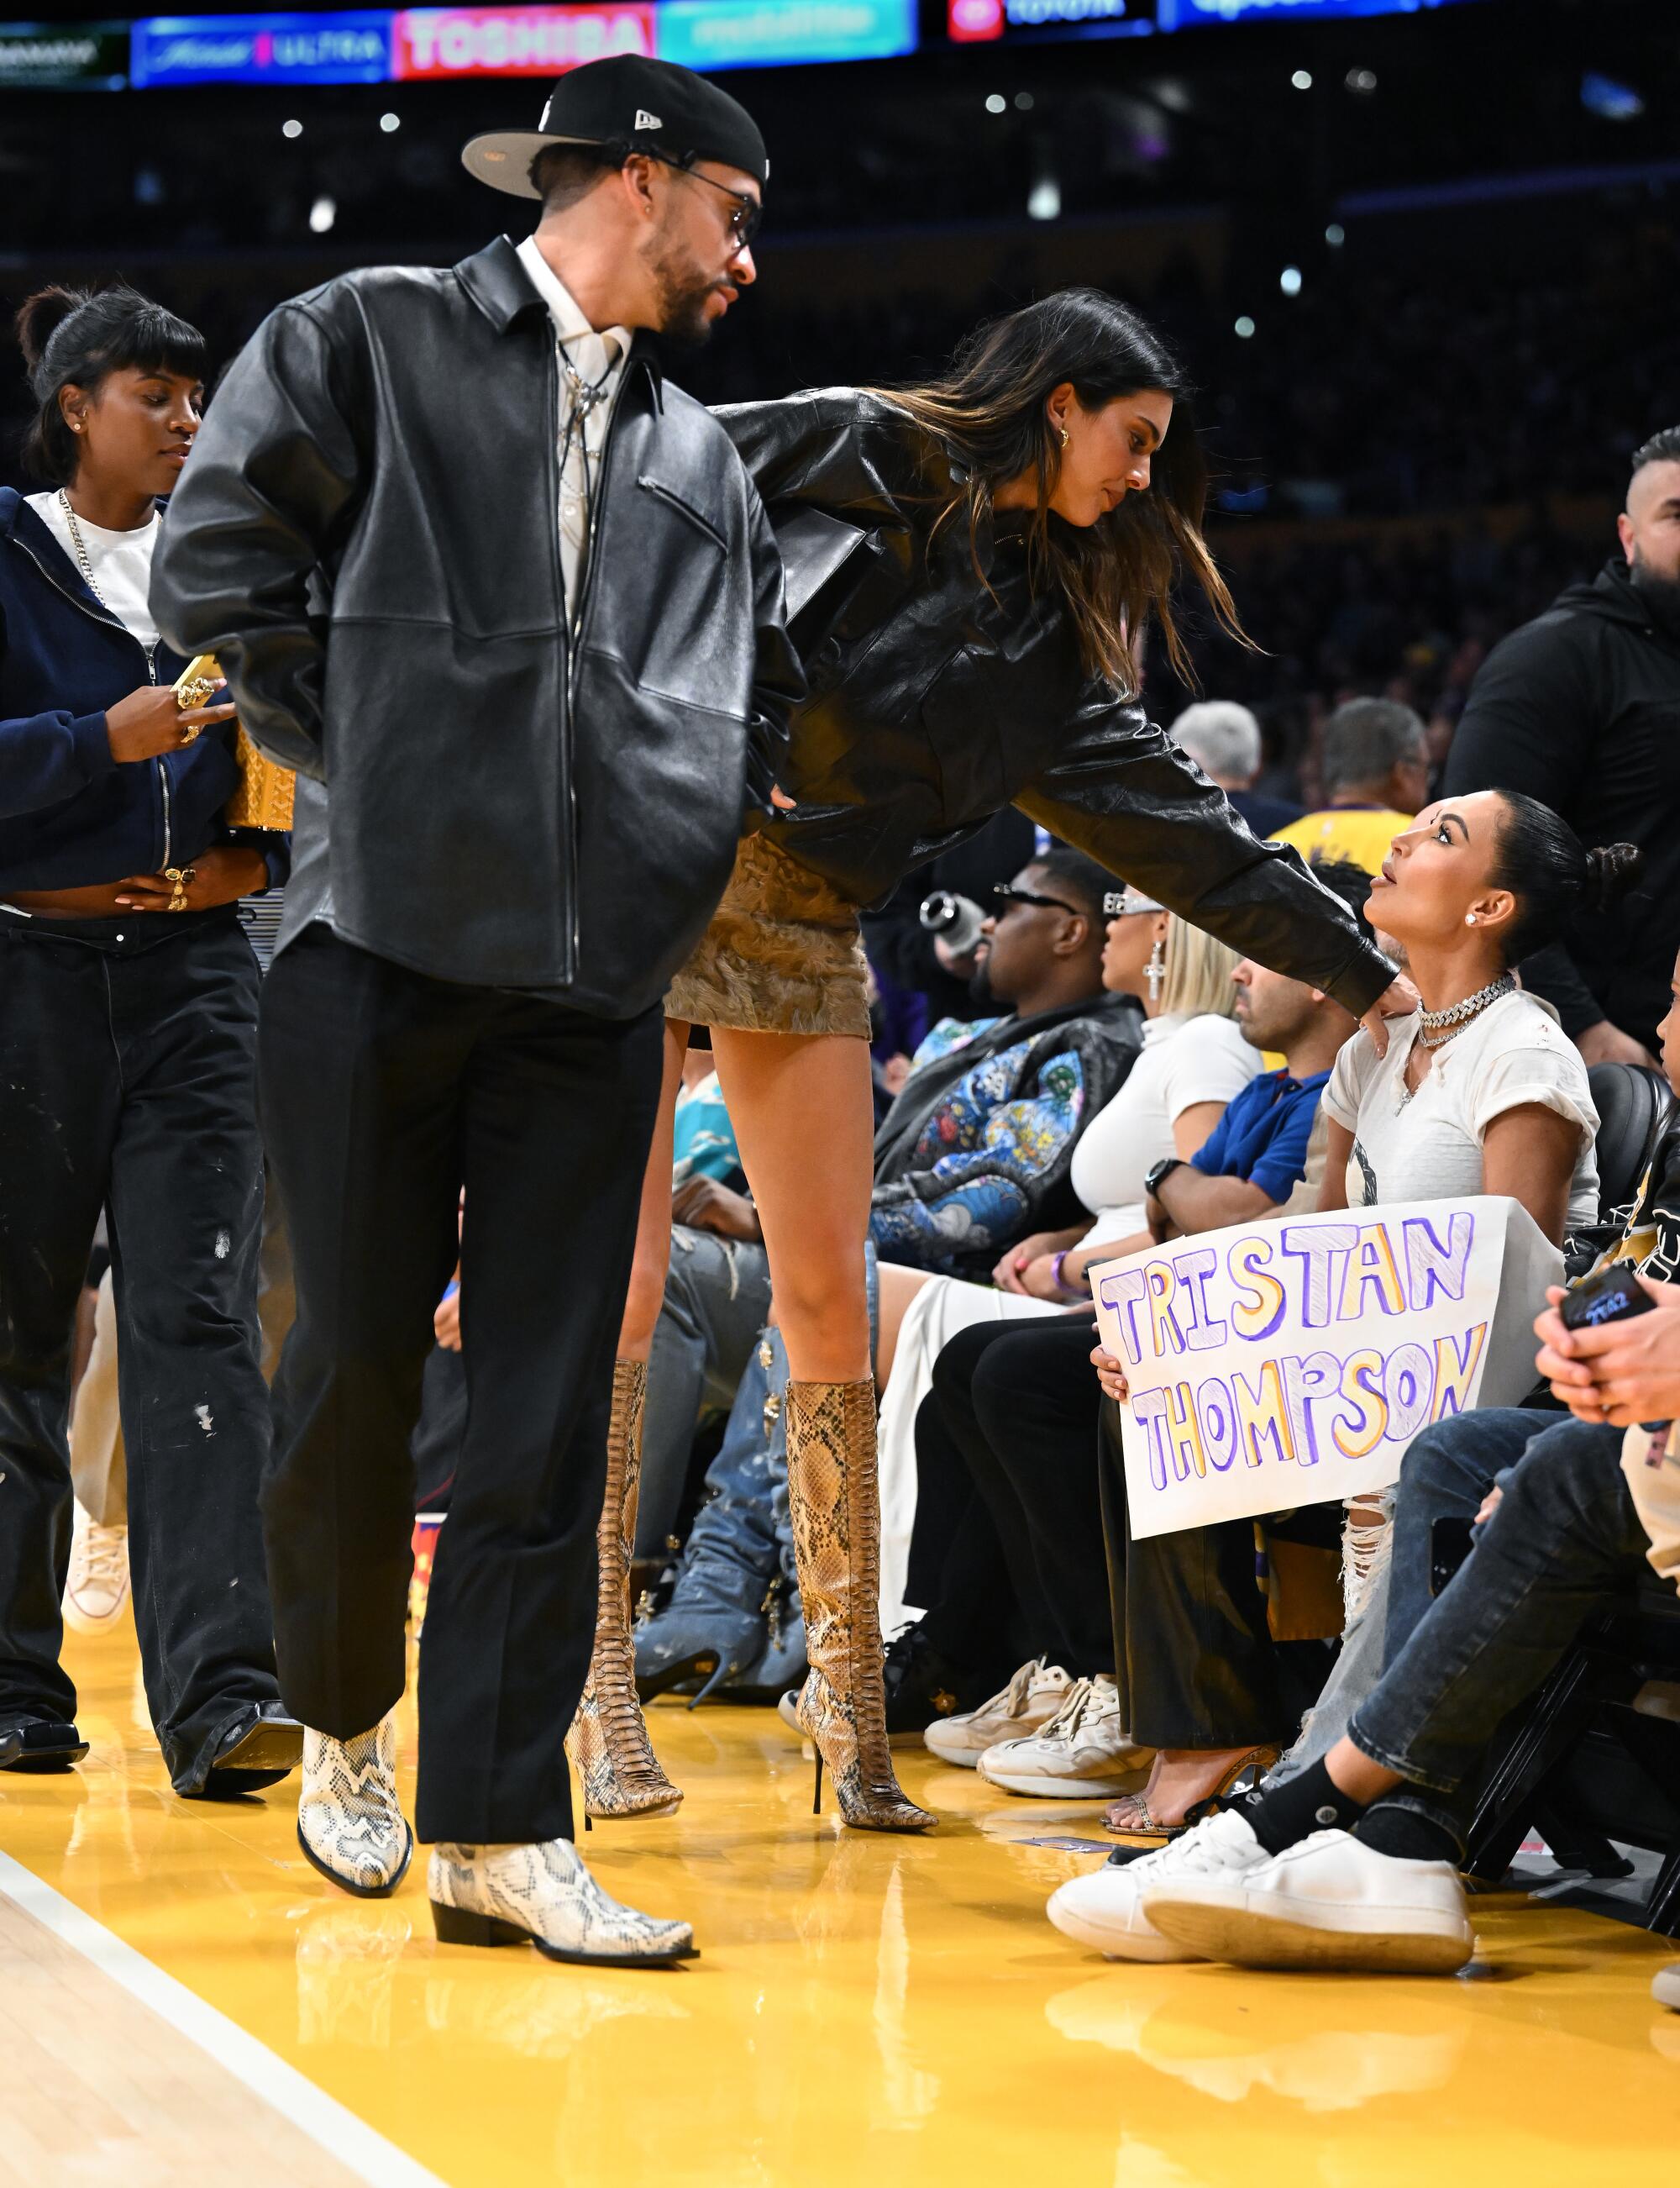 Kendall Jenner & Bad Bunny Sit Courtside at Lakers Playoff Game in